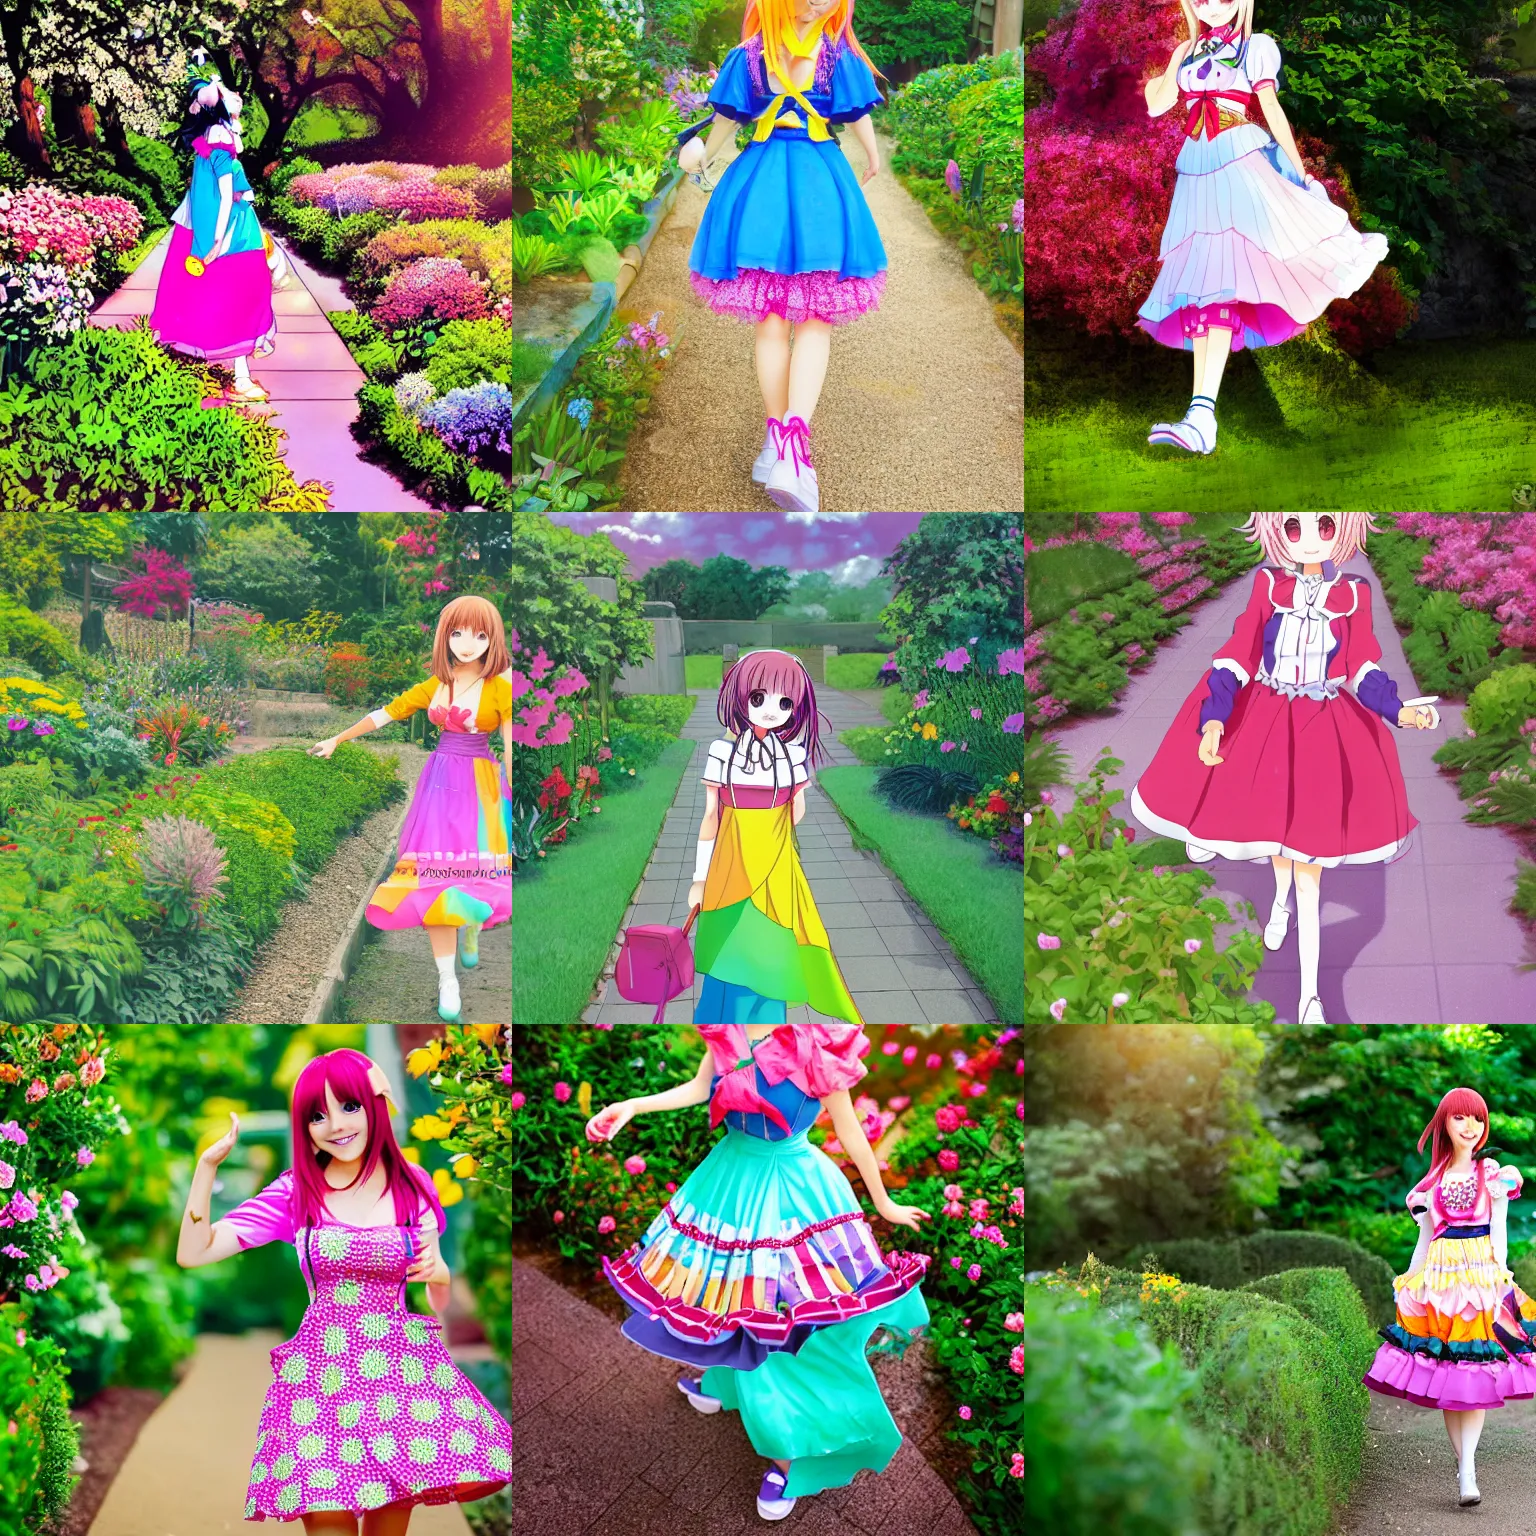 Prompt: a very cute art of a smiling anime girl idol wearing a colorful dress, walking at the garden, detailed